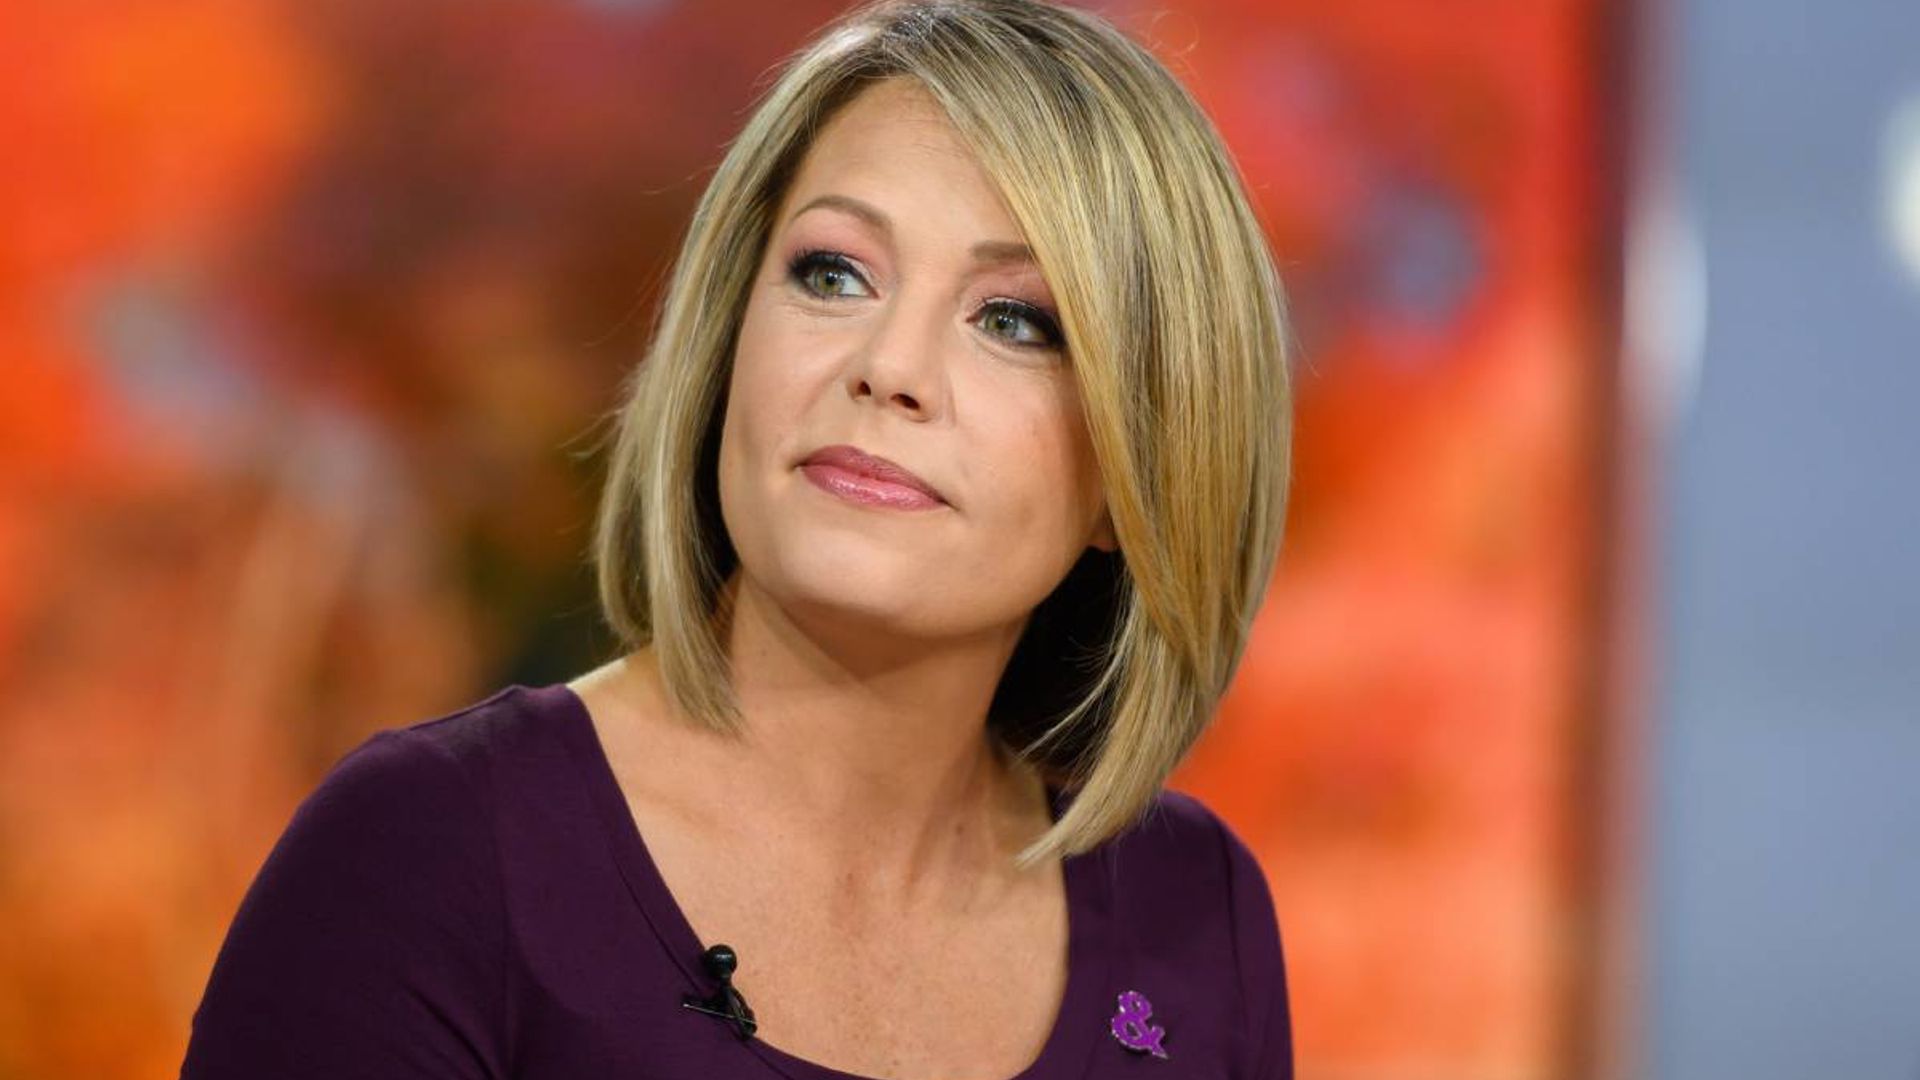 today dylan dreyer emotional message live on air